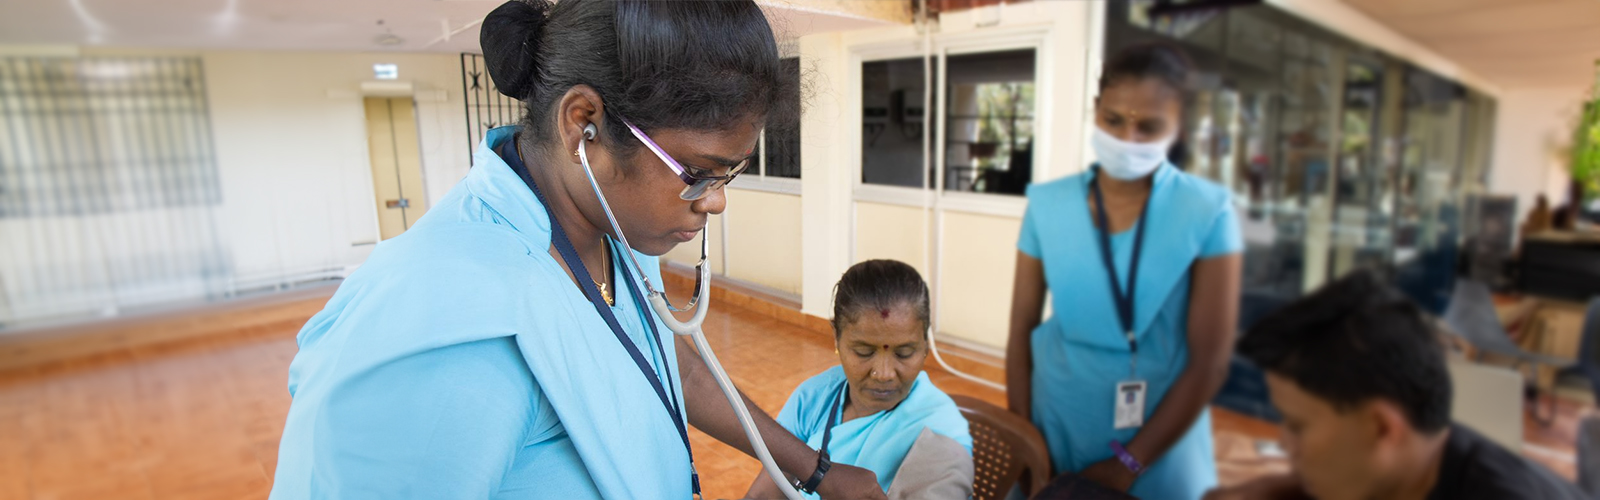 doctor checking a patient using a stethoscope